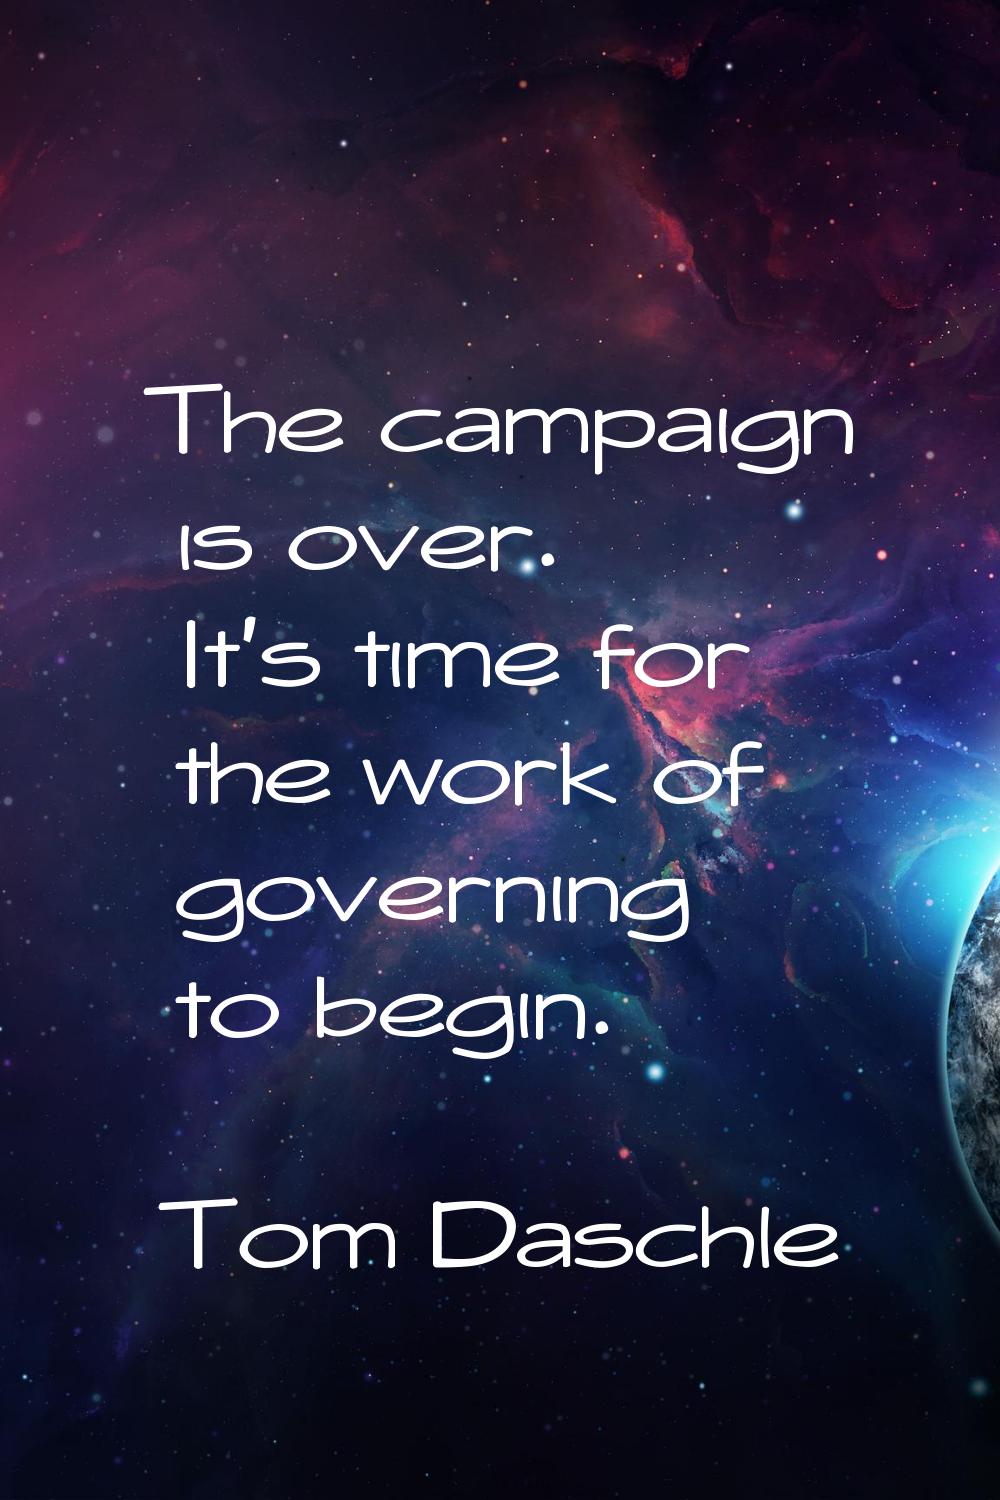 The campaign is over. It's time for the work of governing to begin.